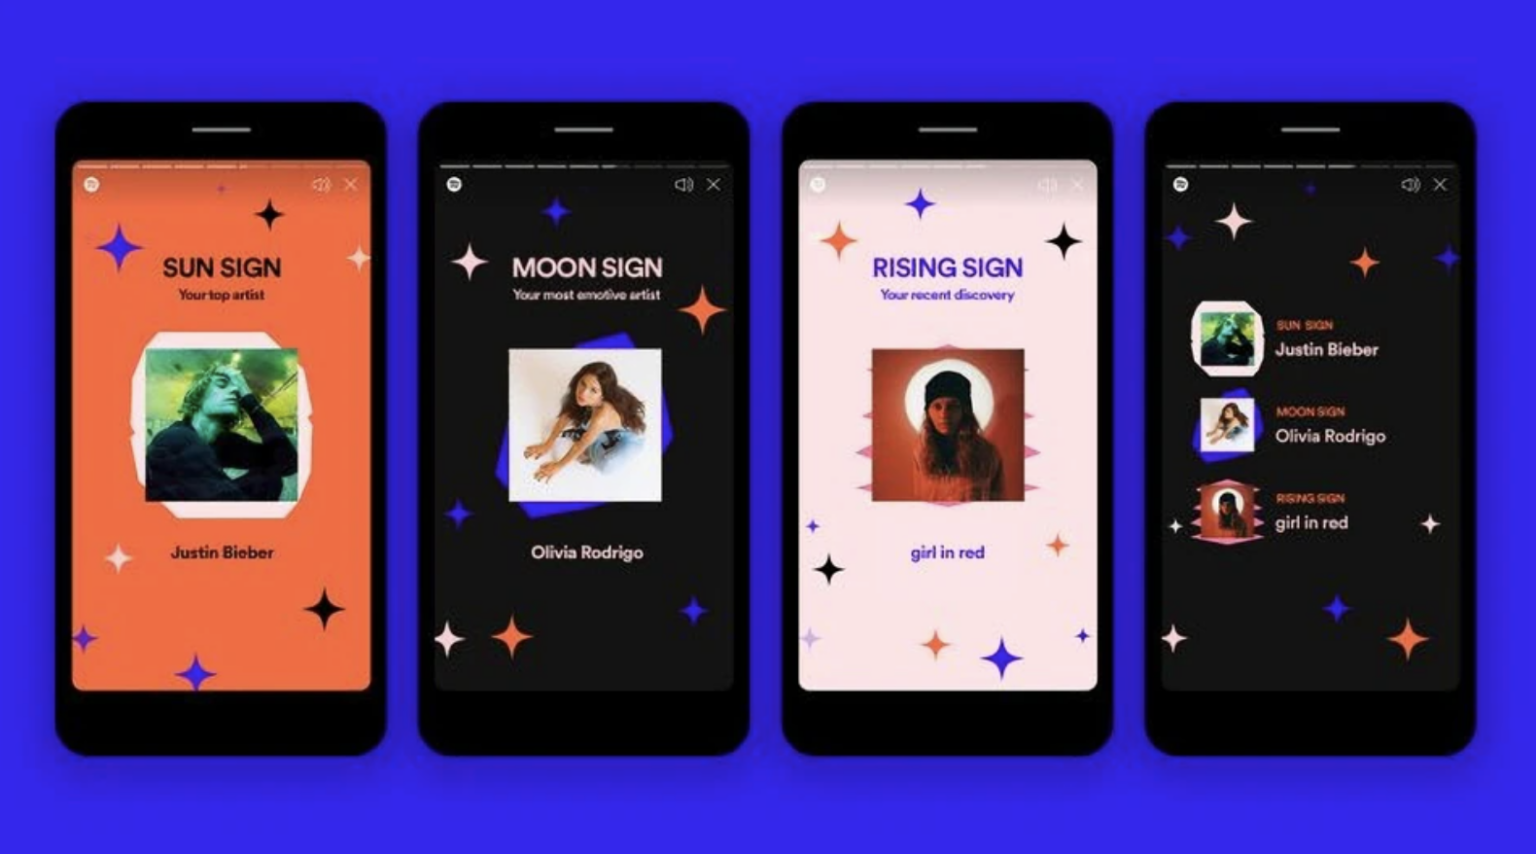 An astrology-themed presentation of artists to users as part of the Spotify "Wrapped"